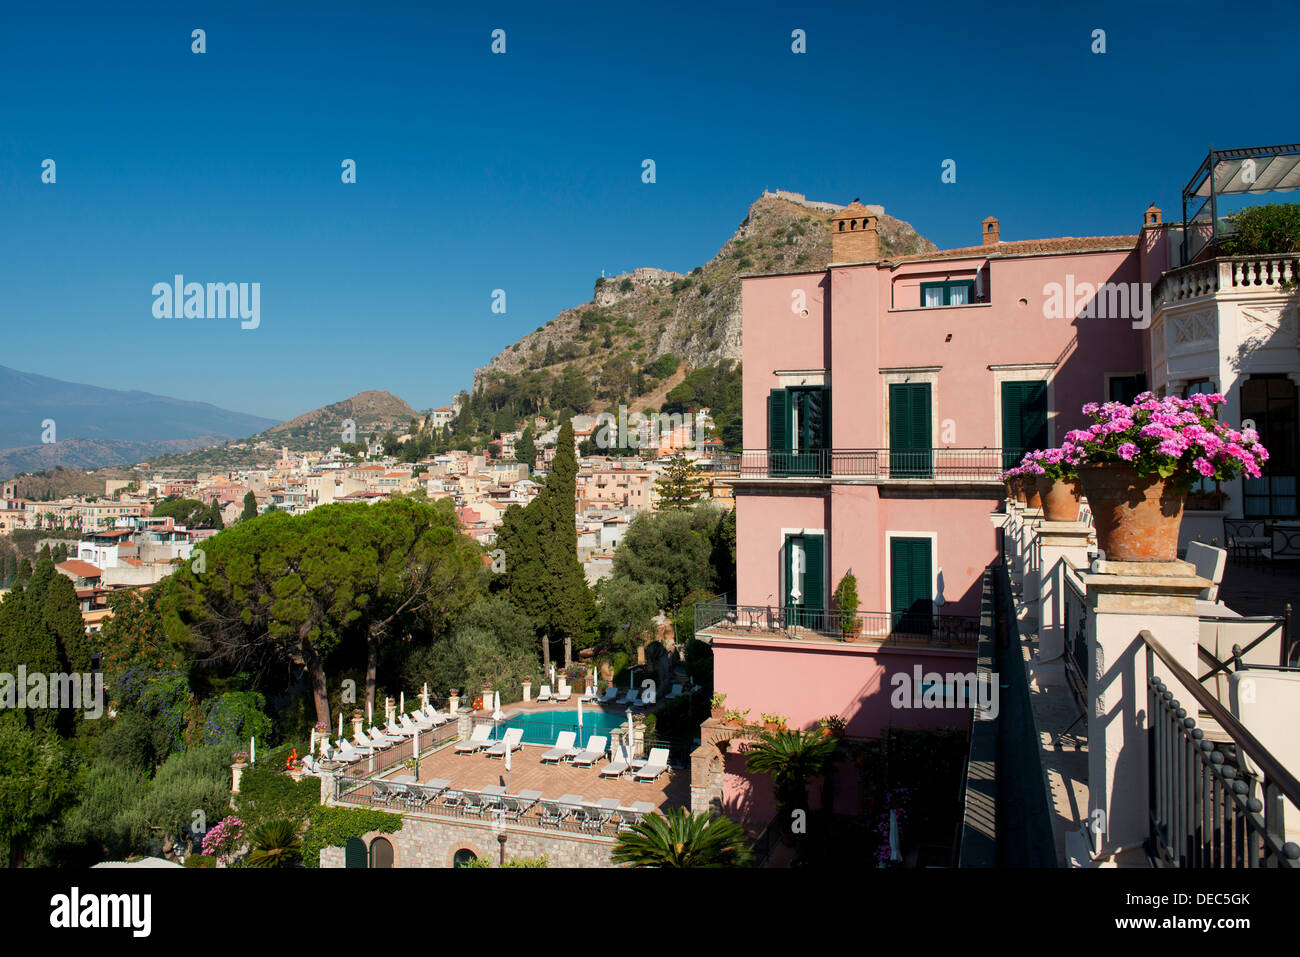 A view of Taormina from the terrace of the Grand Hotel Timeo e